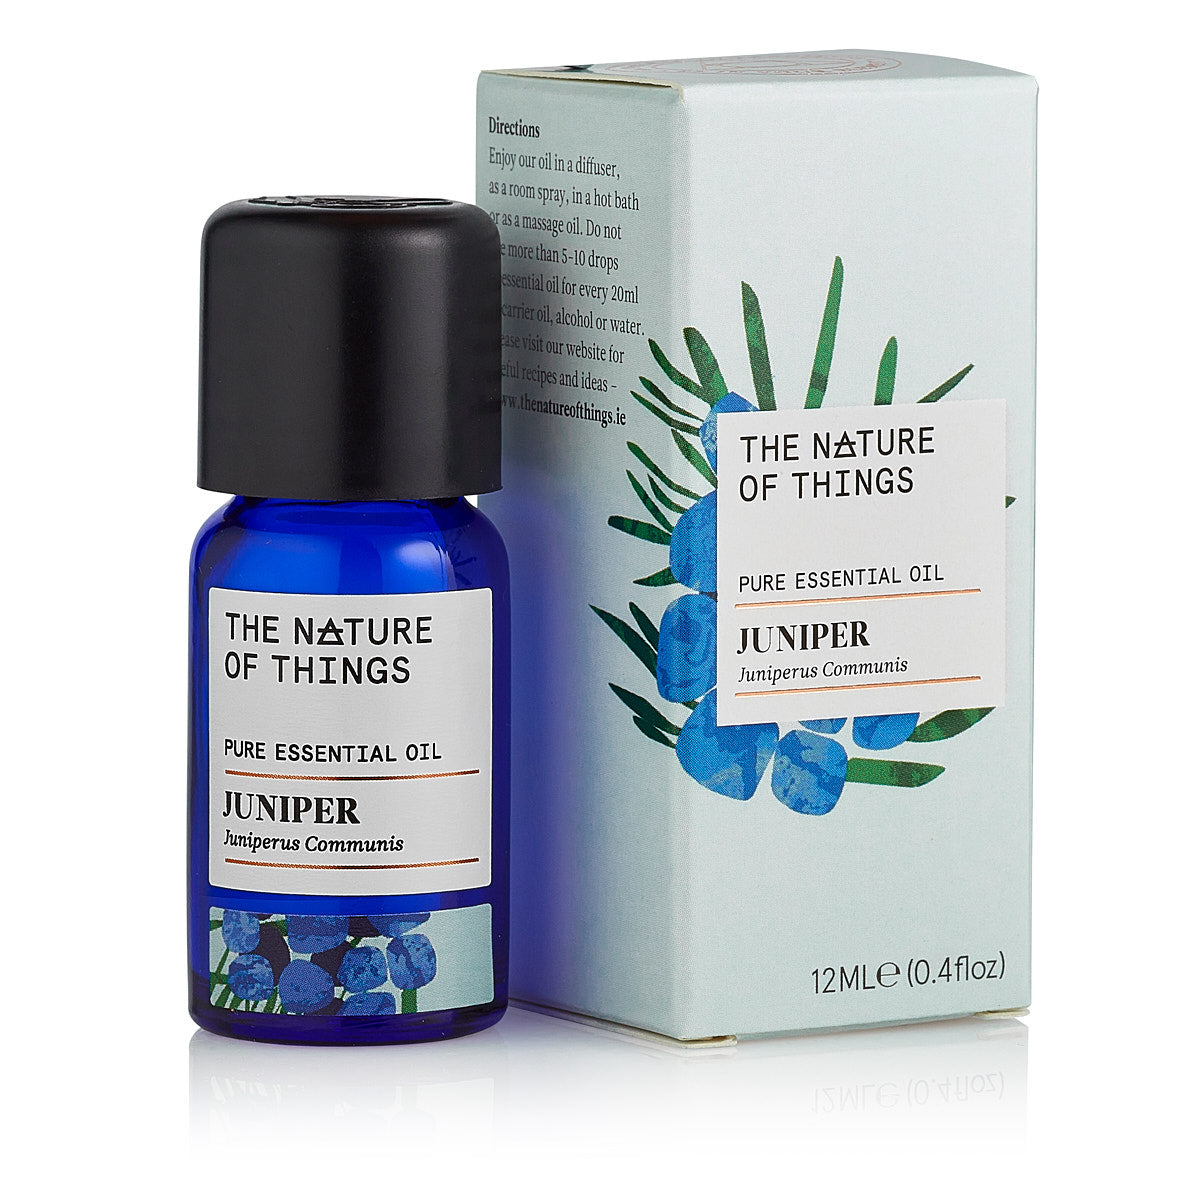 Juniper Berry Essential Oil from The Nature of Things